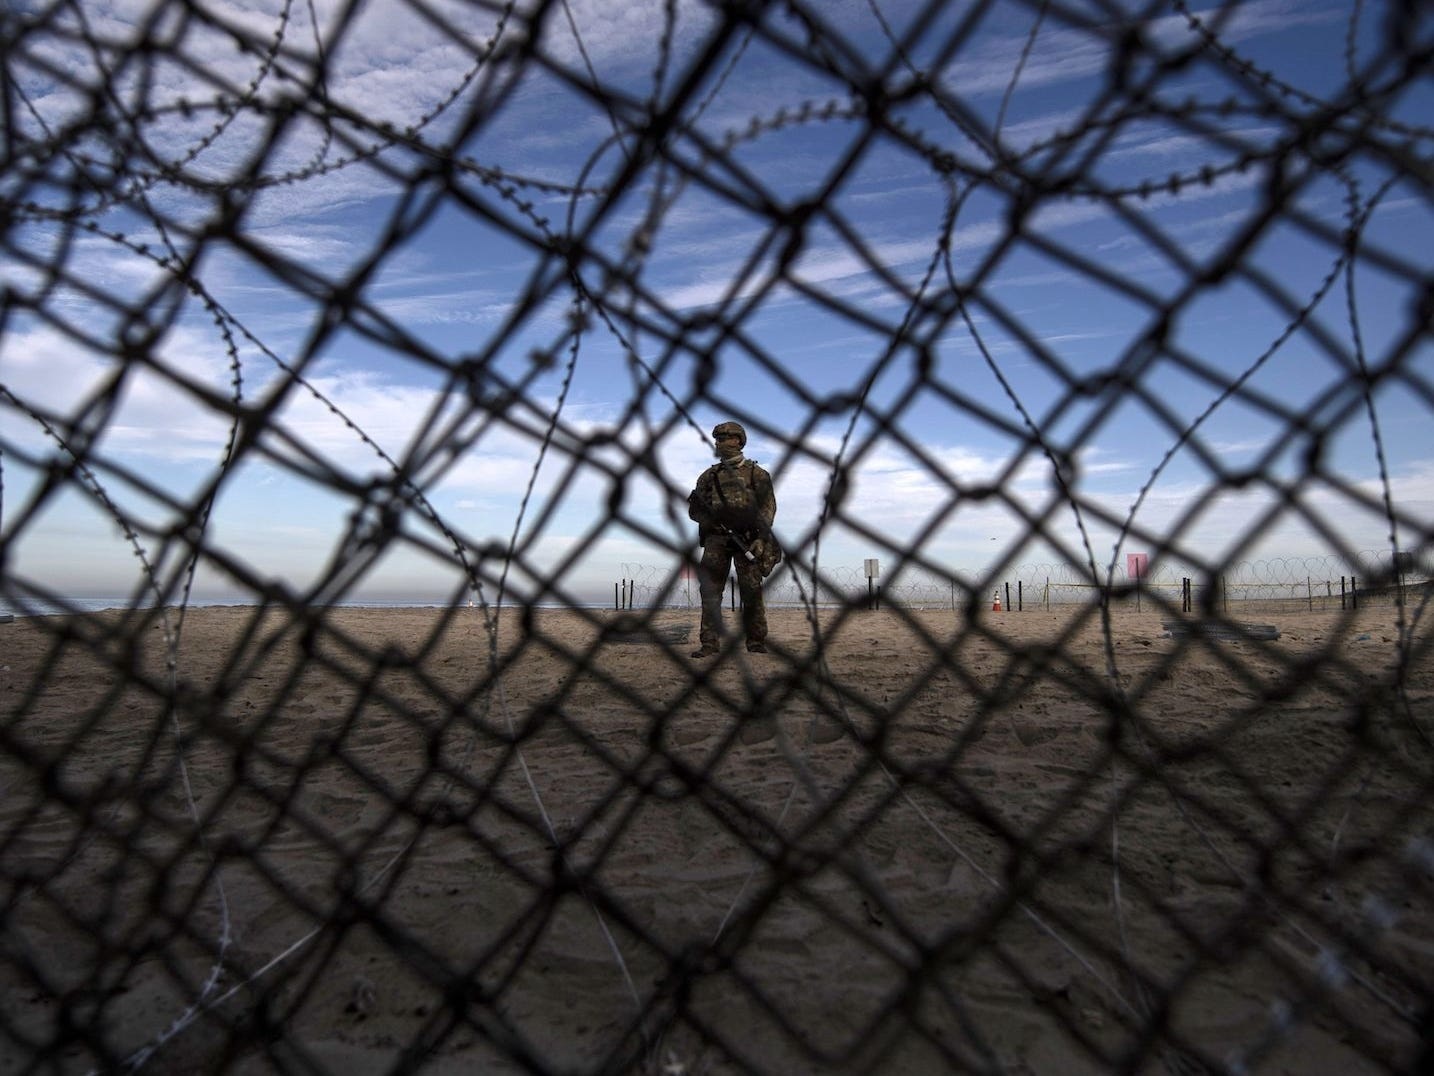 A US Customs and Border Protection agent stands guard on the US side of the US-Mexico border fence.
